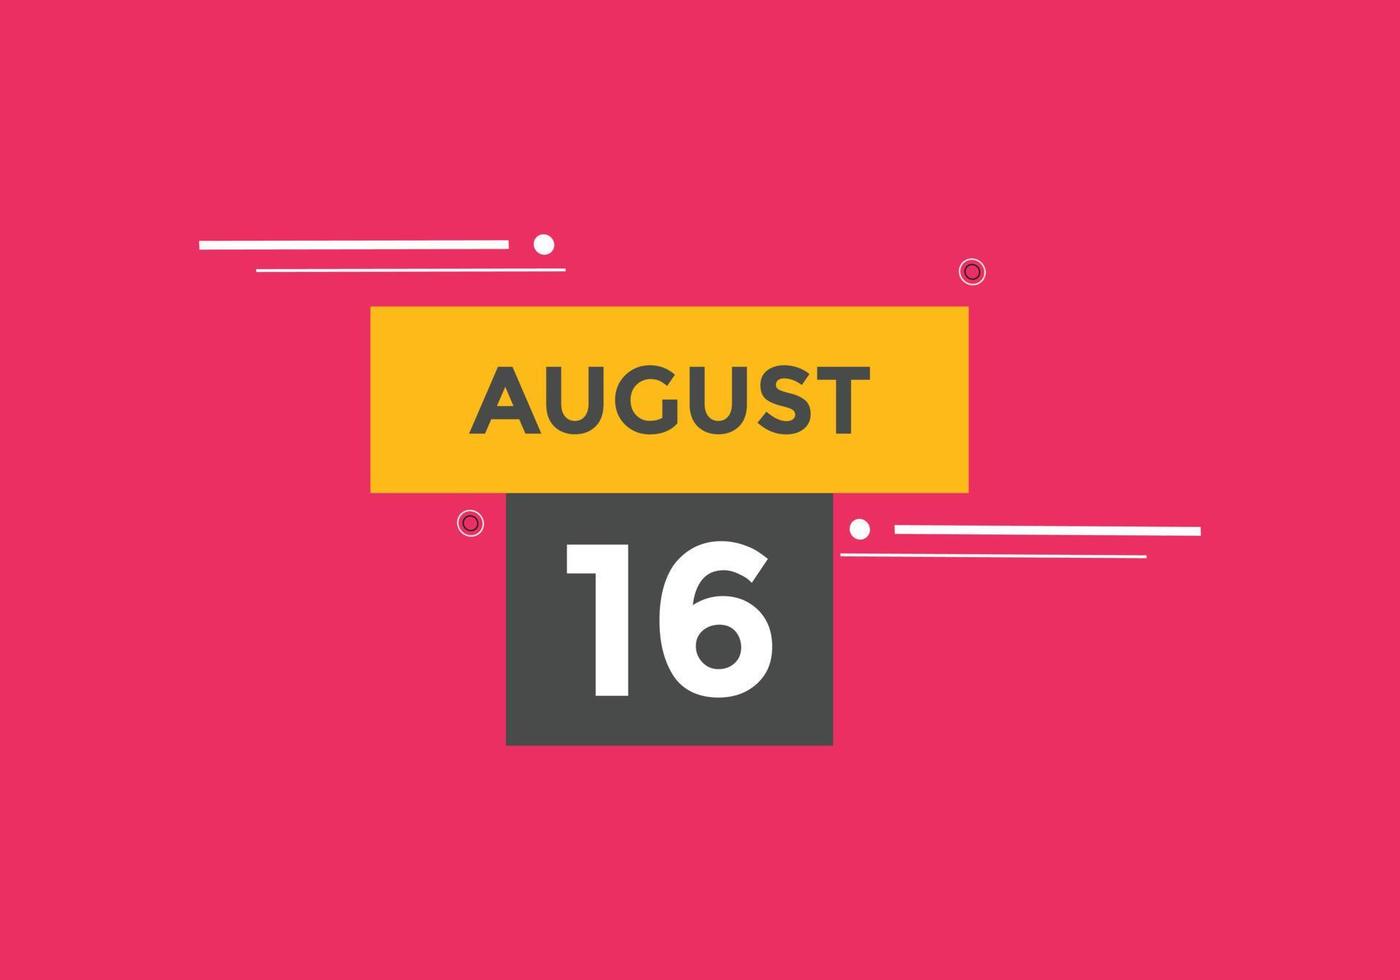 august 16 calendar reminder. 16th august daily calendar icon template. Calendar 16th august icon Design template. Vector illustration